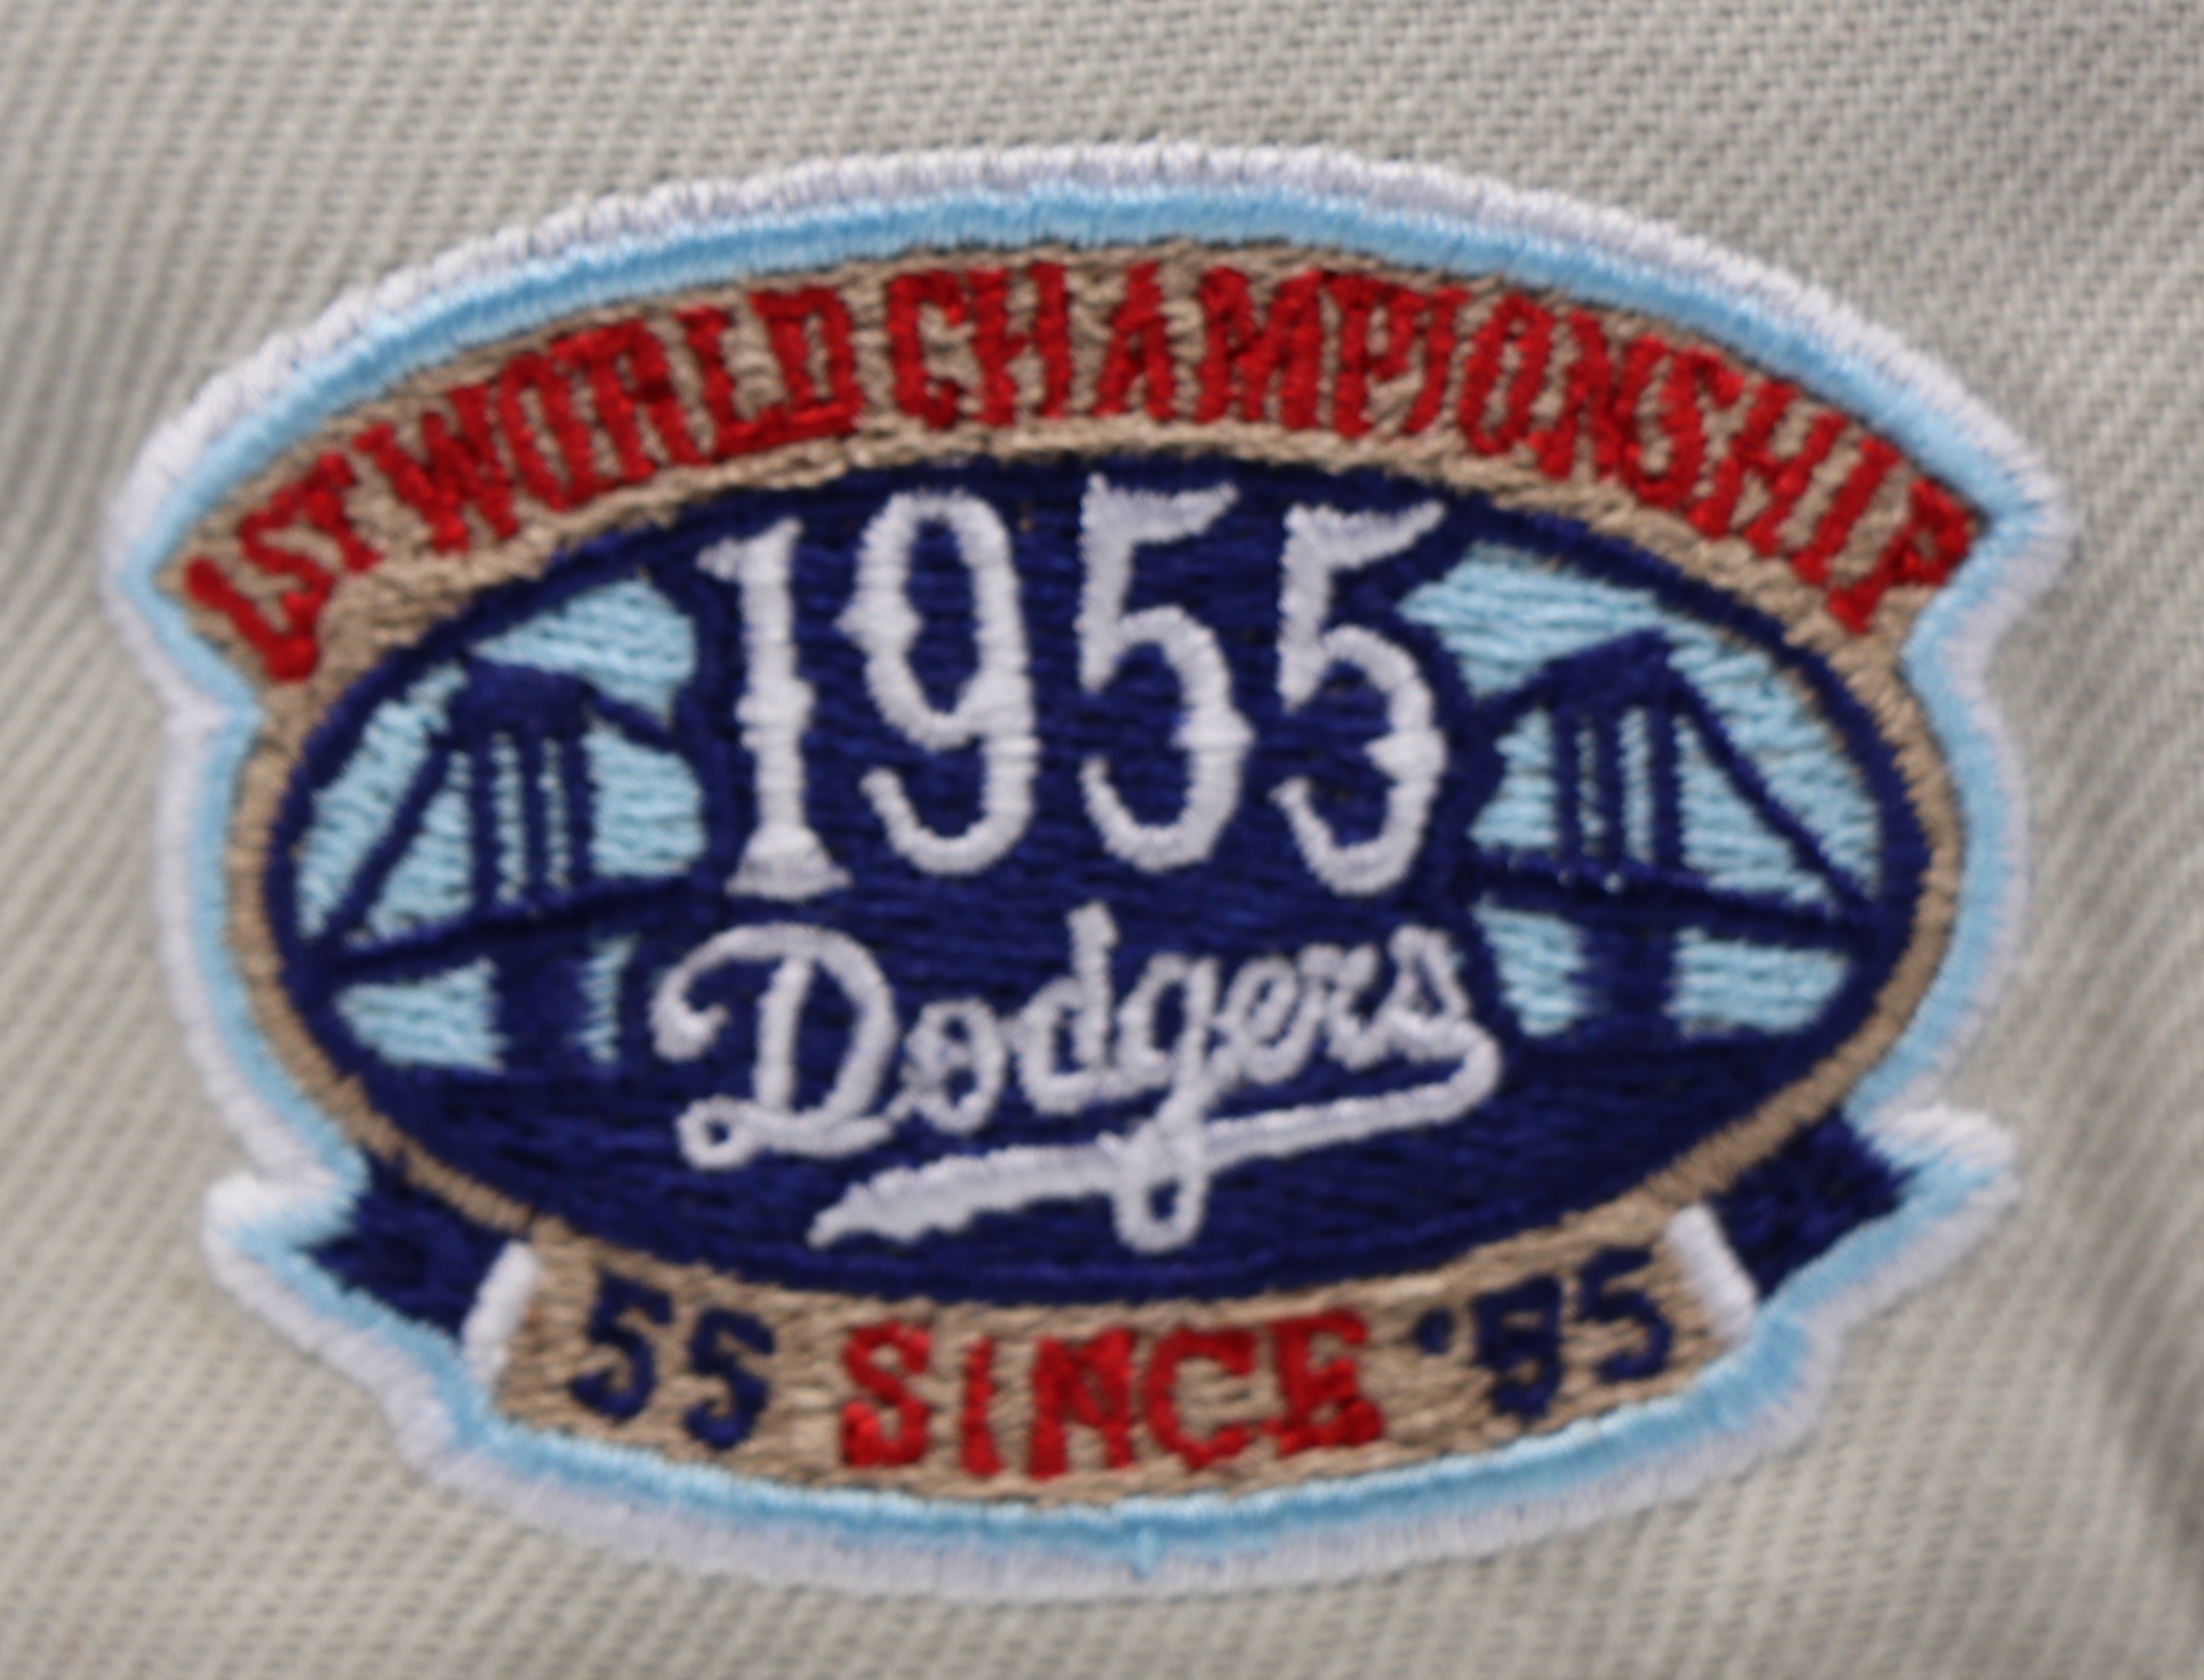 BROOKLYN DODGERS (STONE) (1955 WORLDSERIES CHAMPIONS) NEW ERA 59FIFTY FITTED